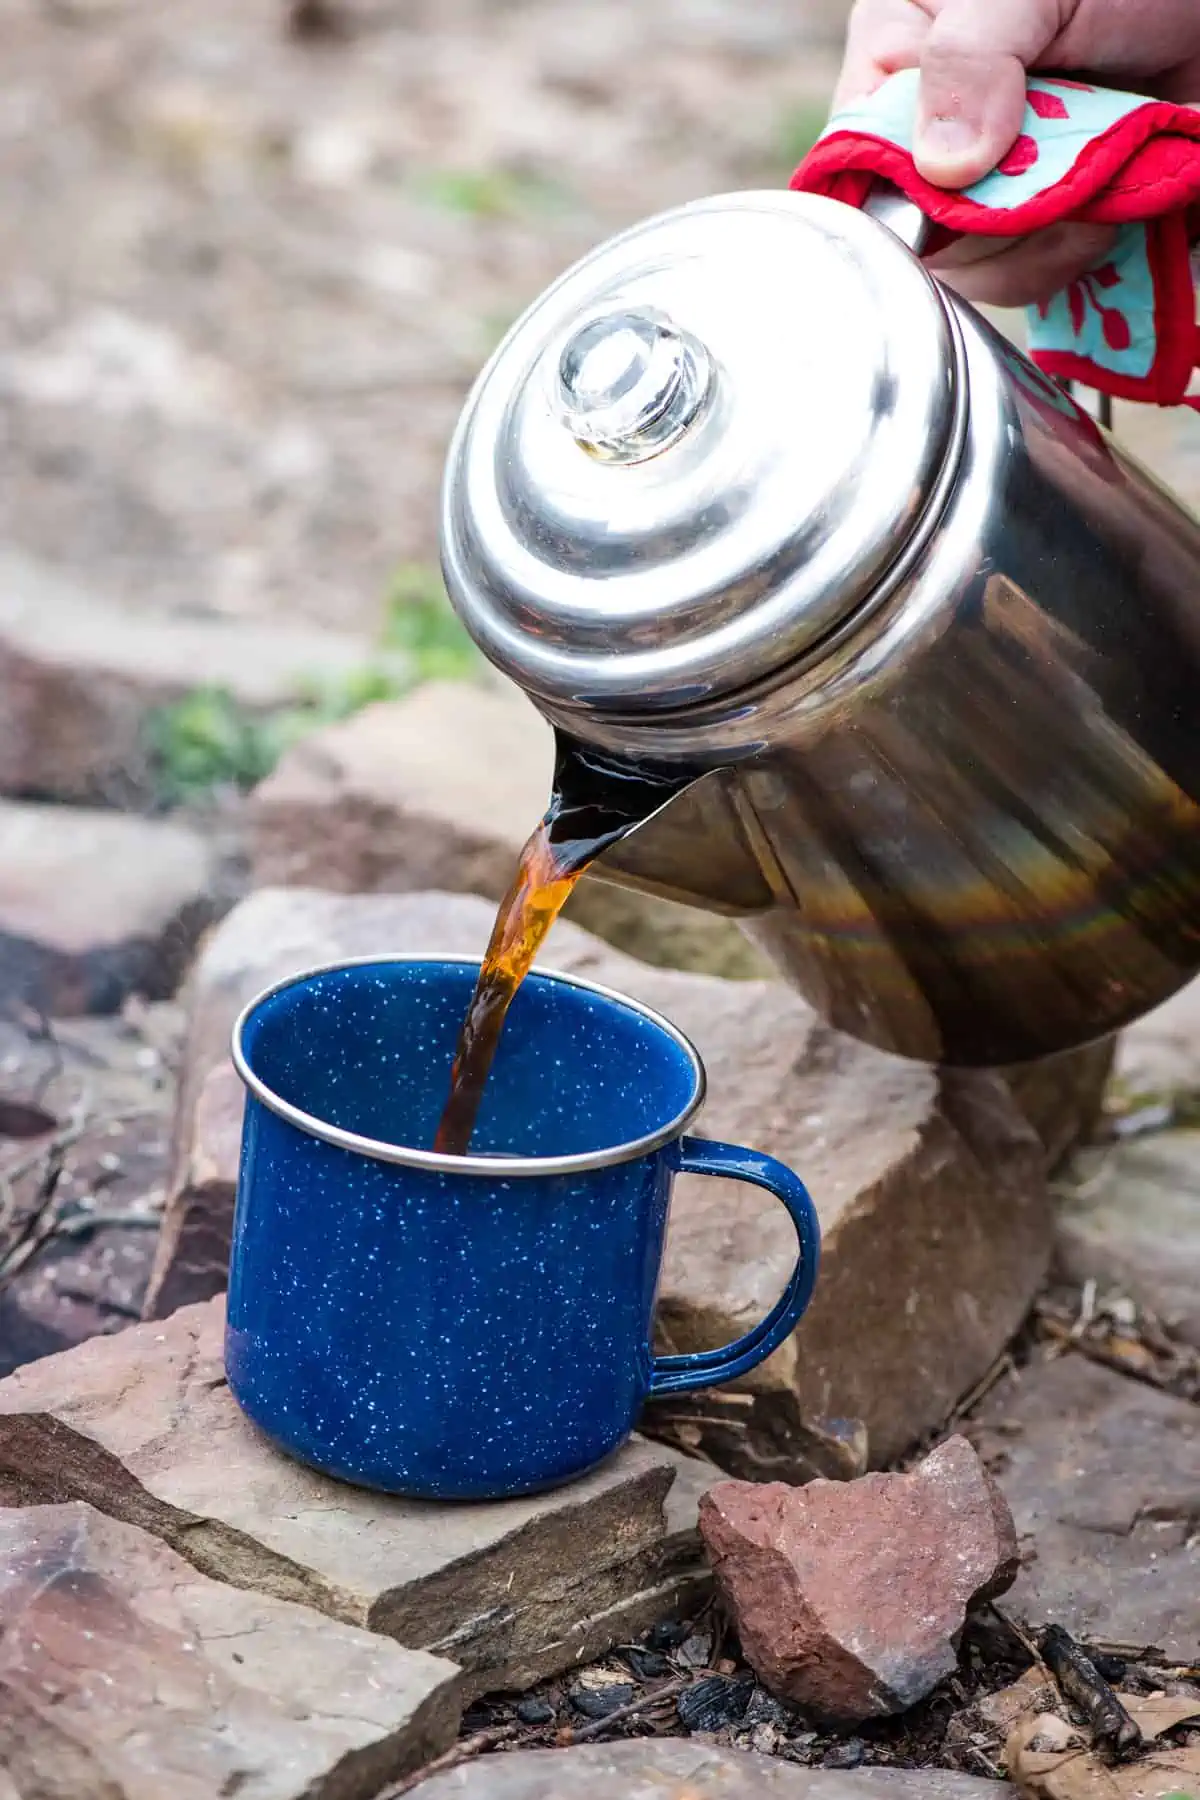 pouring camp coffee from a percolator into a blue enamelware mug